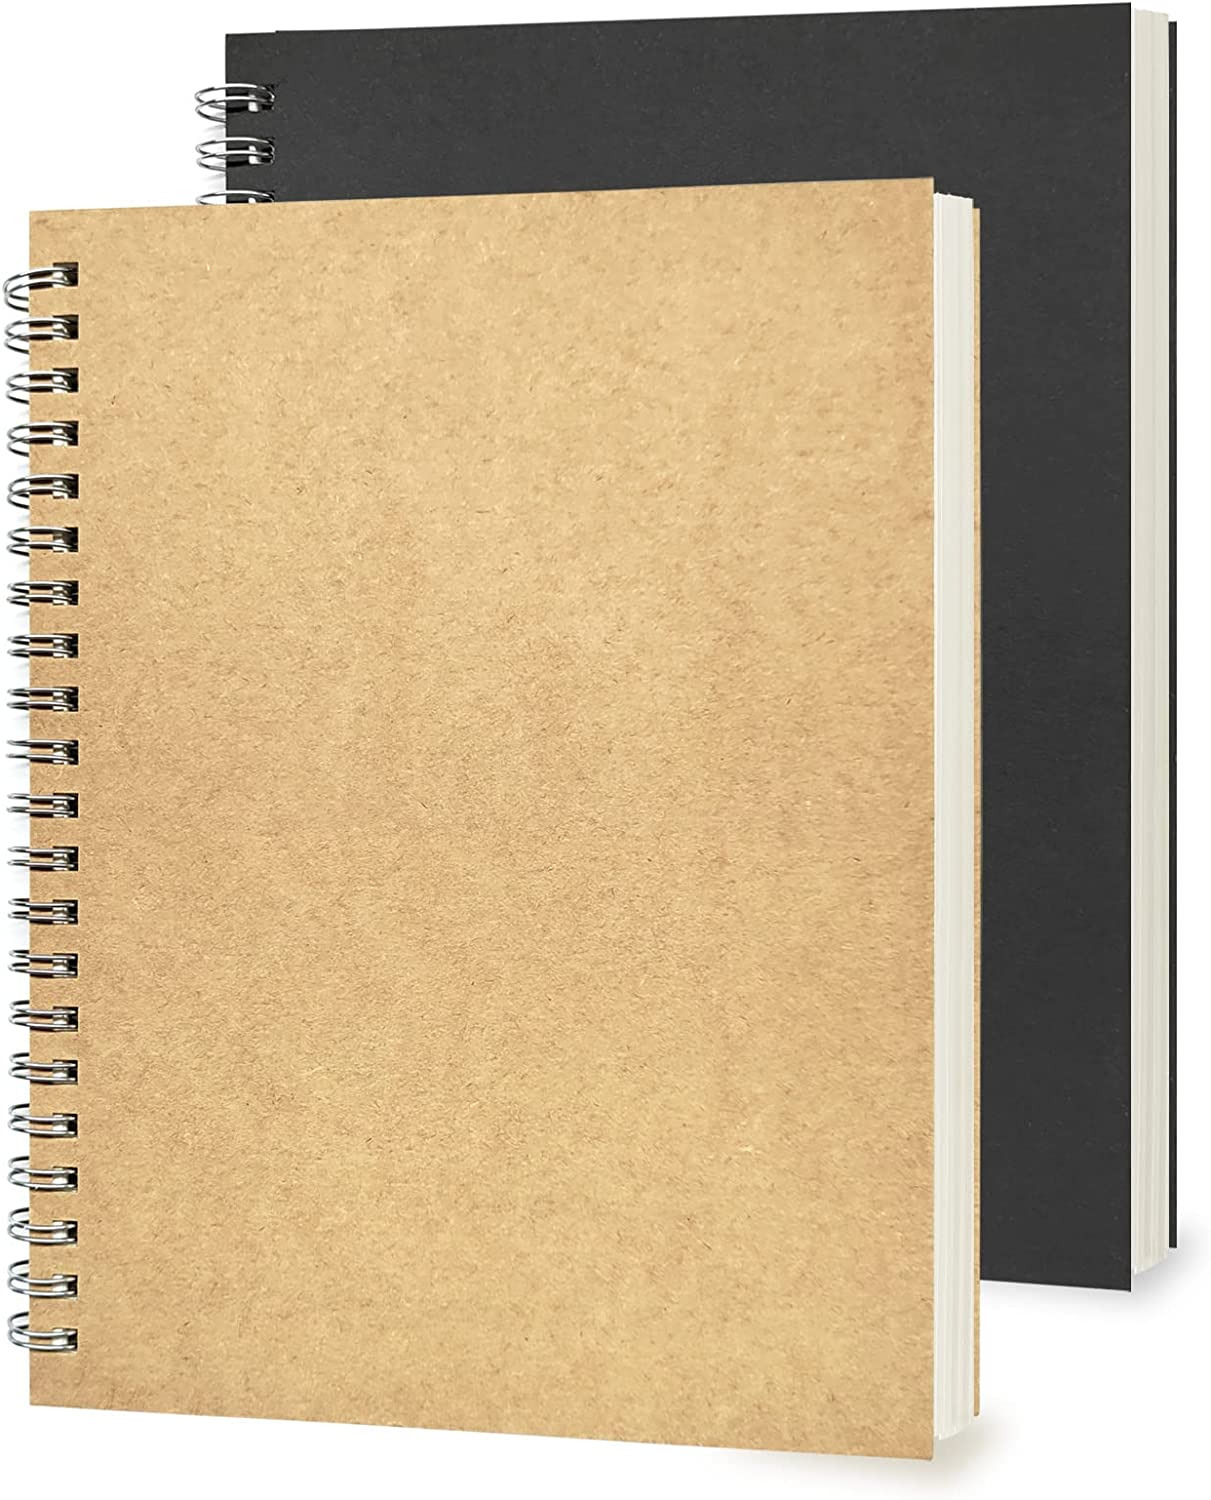 2 Pack College Ruled Wire bound Spiral Notebook College Ruled 100 Pages 50 Sheet